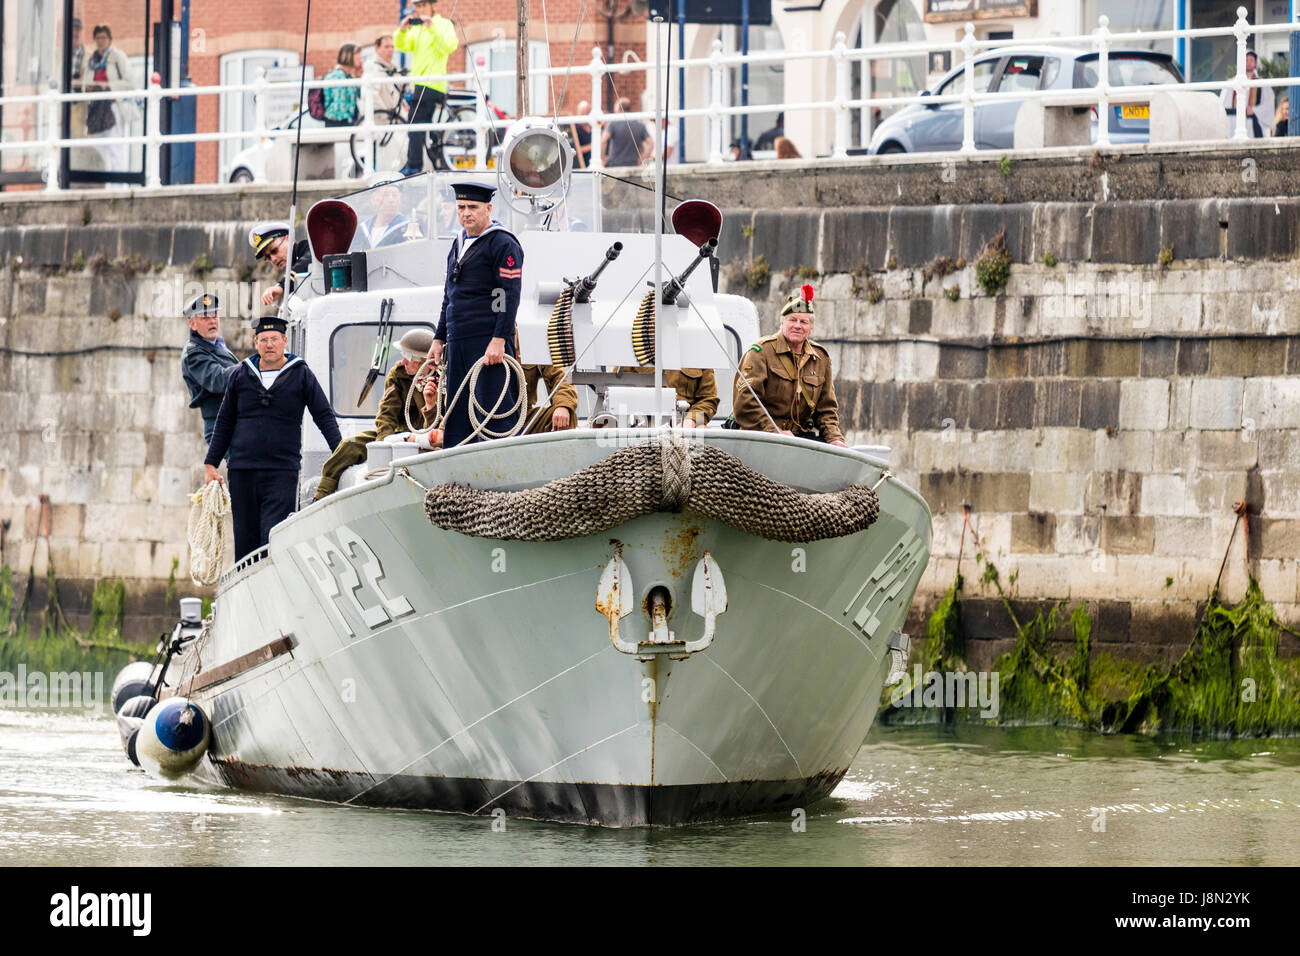 Dunkirk evacuation re-enactment at Ramsgate harbour in England. US type 21 patrol boat, the restored P22 approaching as it comes into dock at Ramsgate harbour with wounded and exhausted British soldiers on board. Stock Photo